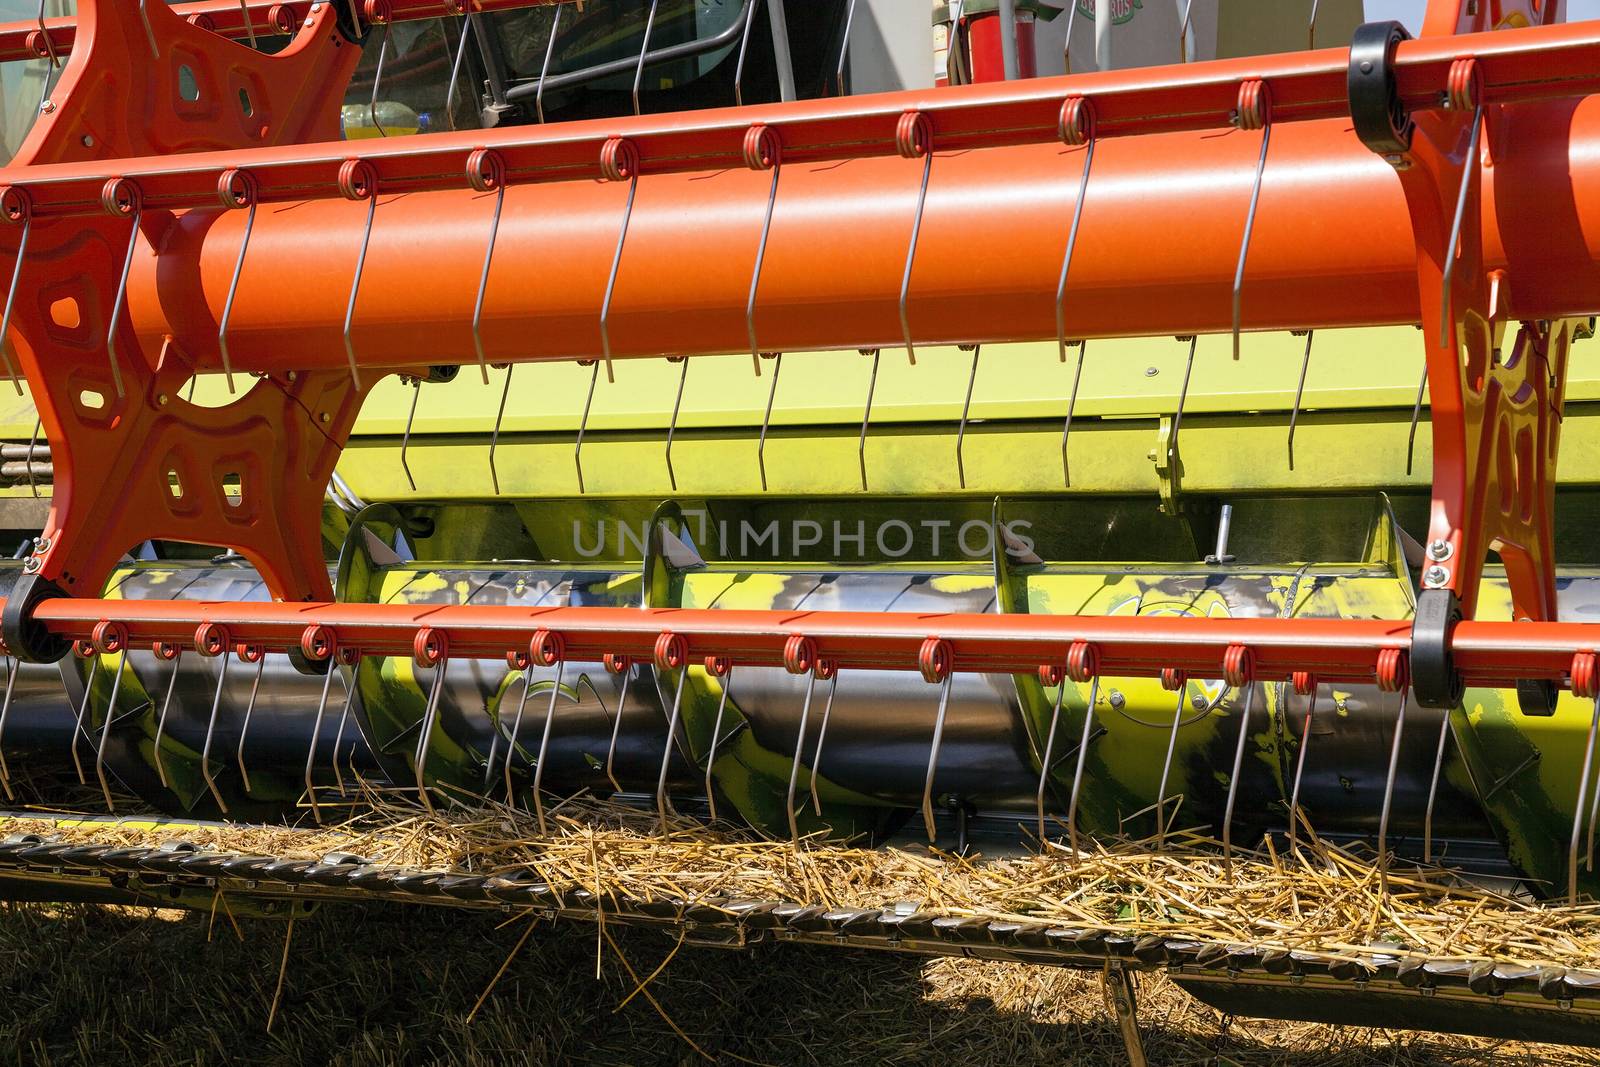  the combine harvesters photographed by a close up